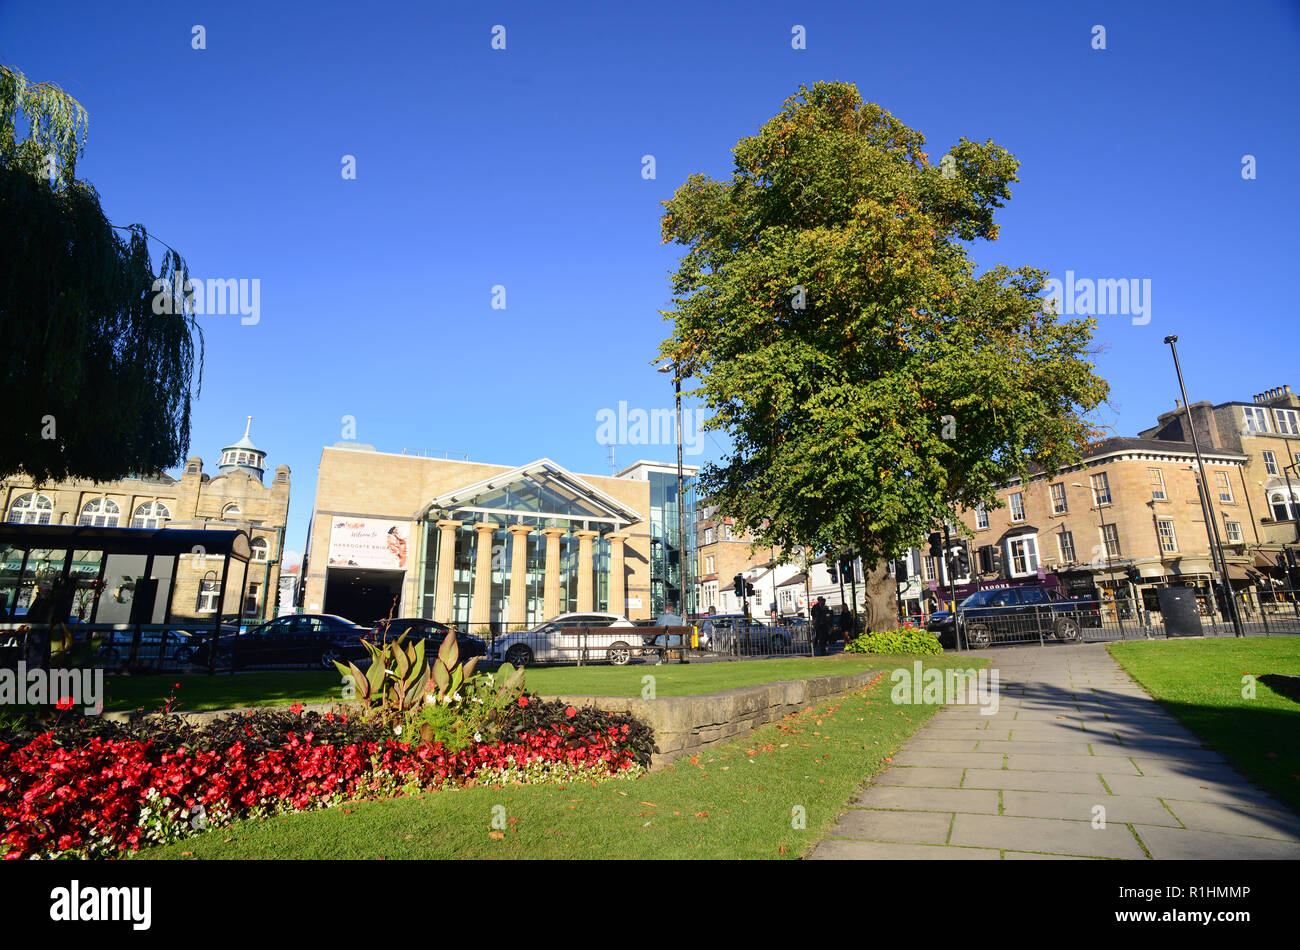 people entering and leaving harrogate conference and traffic passing redcentre yorkshire united kingdom Stock Photo